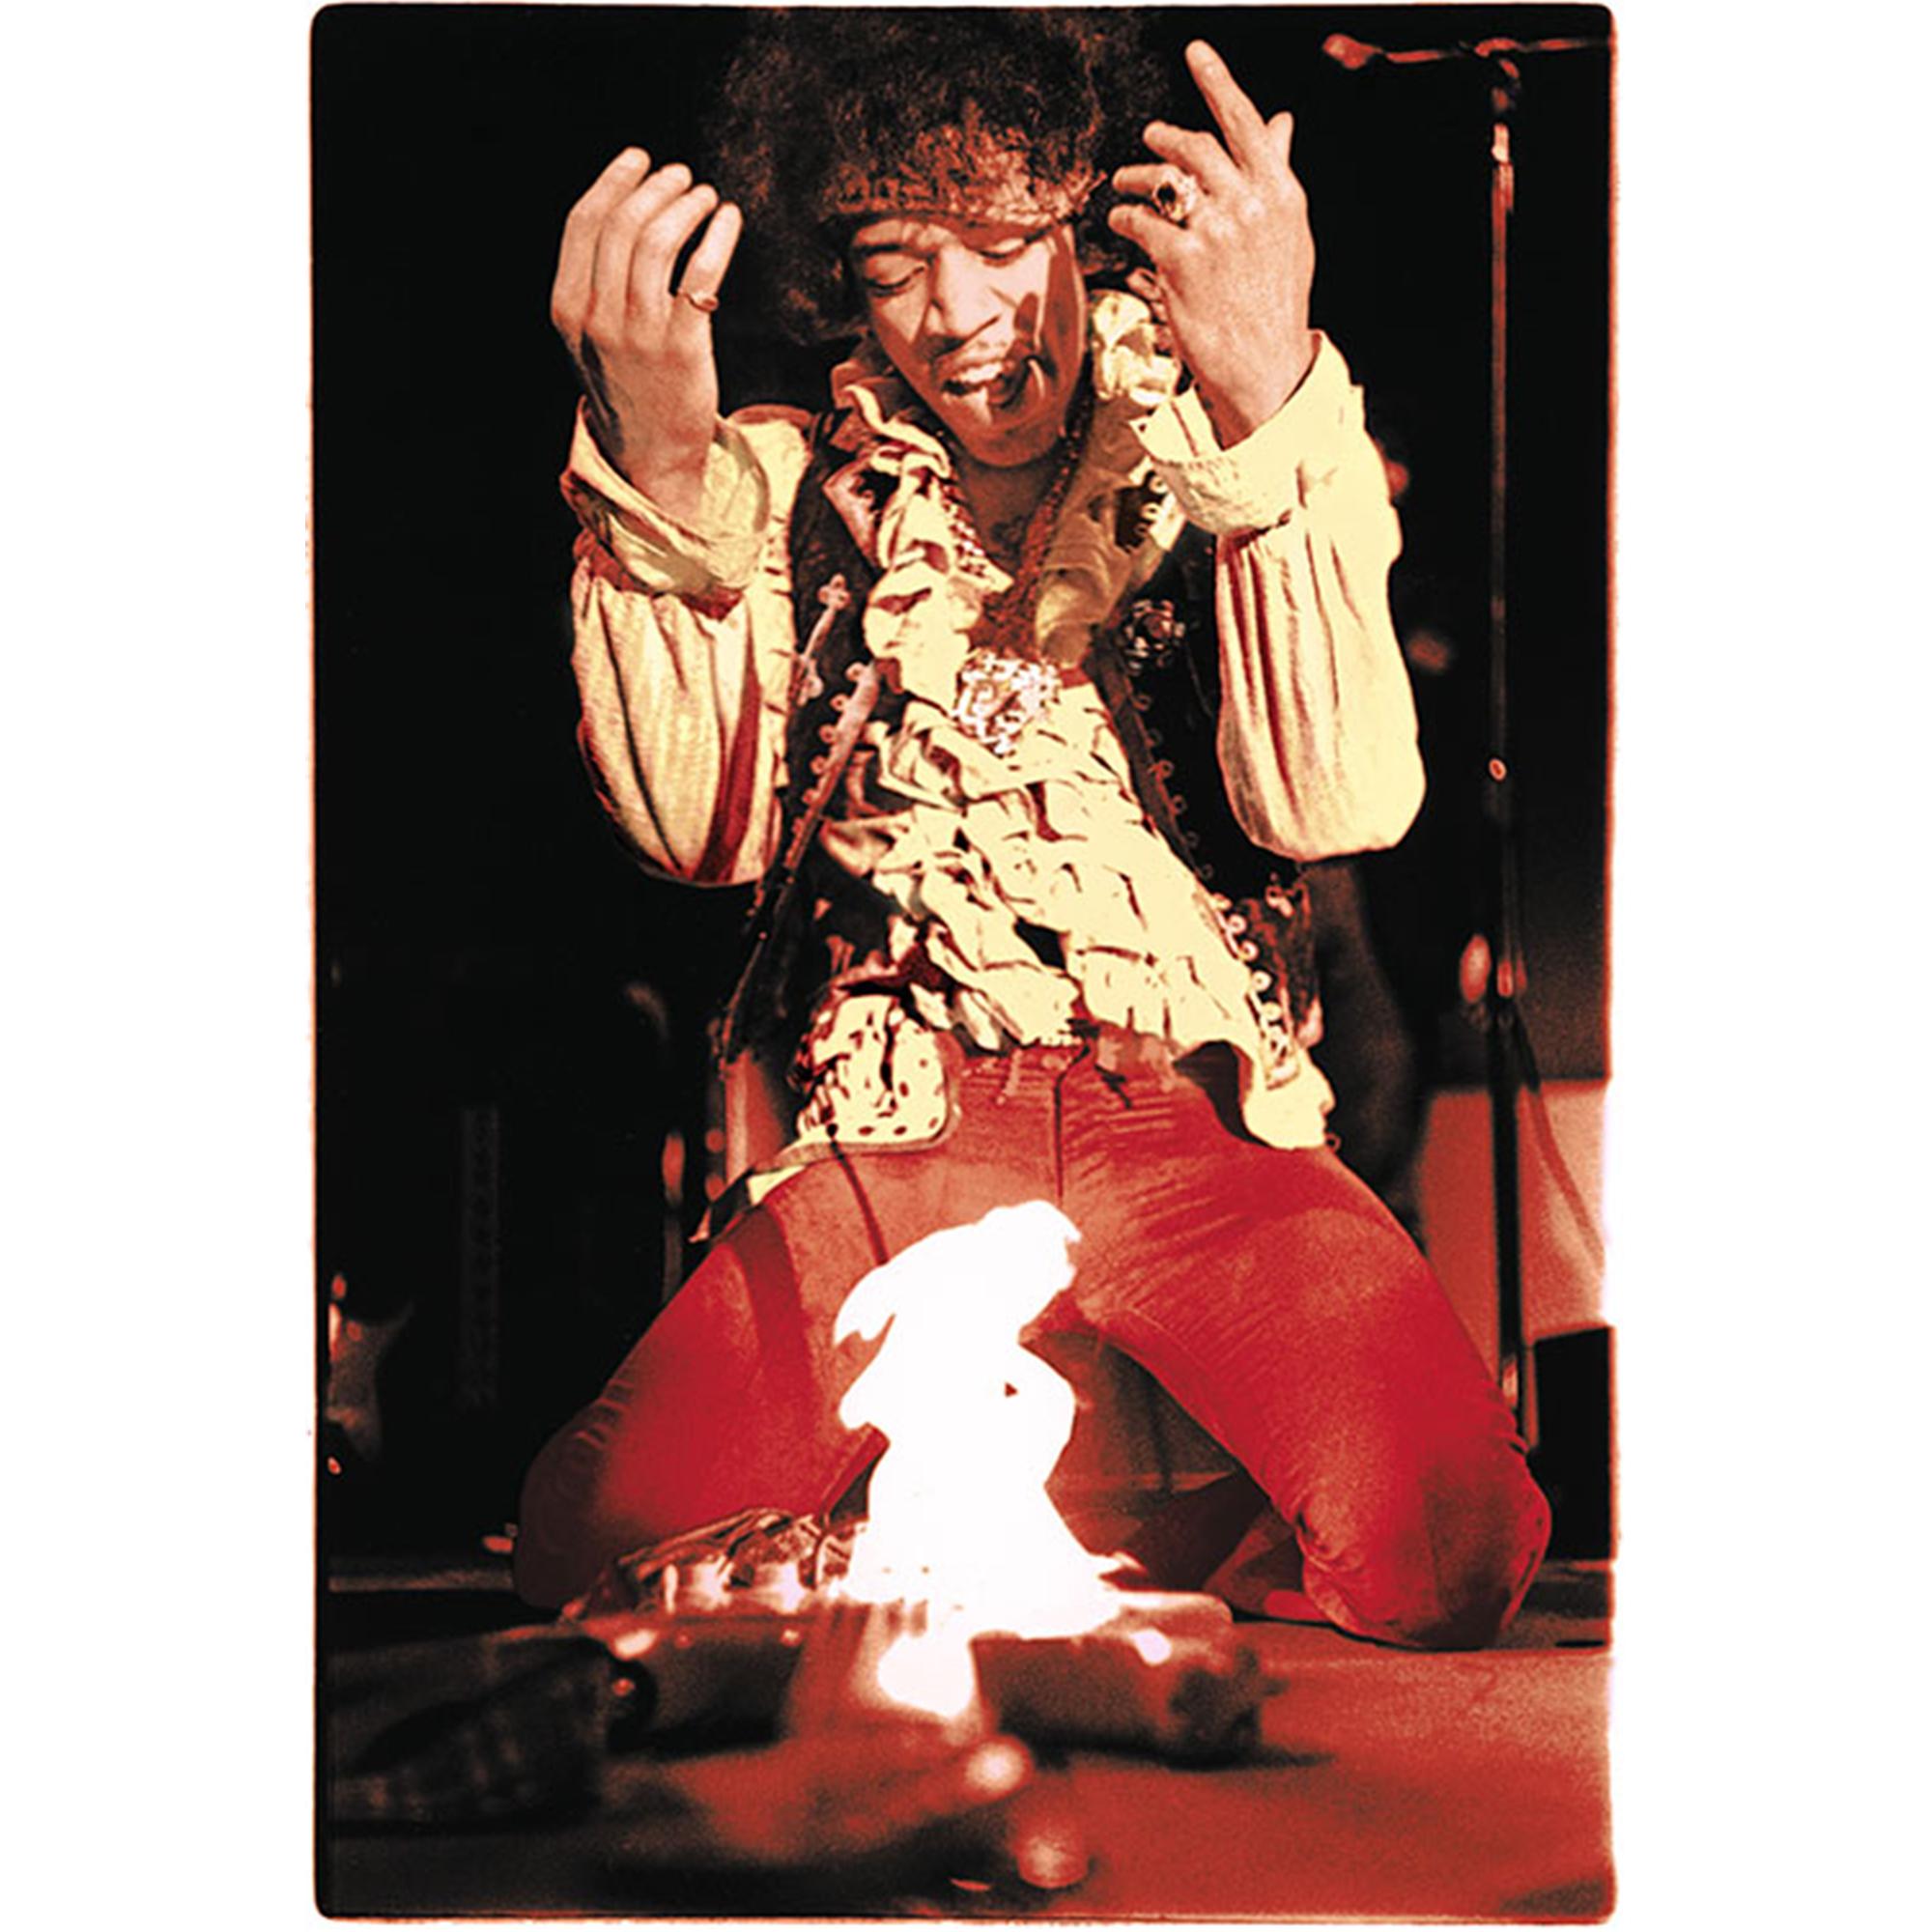 Signed limited edition print by Ed Caraeff of Jimi Hendrix setting fire to his Fender Stratocaster guitar while performing at the Monterey International Pop Music Festival, on June 18, 1967 in Monterey, California.

Taken when he was 17 years old,